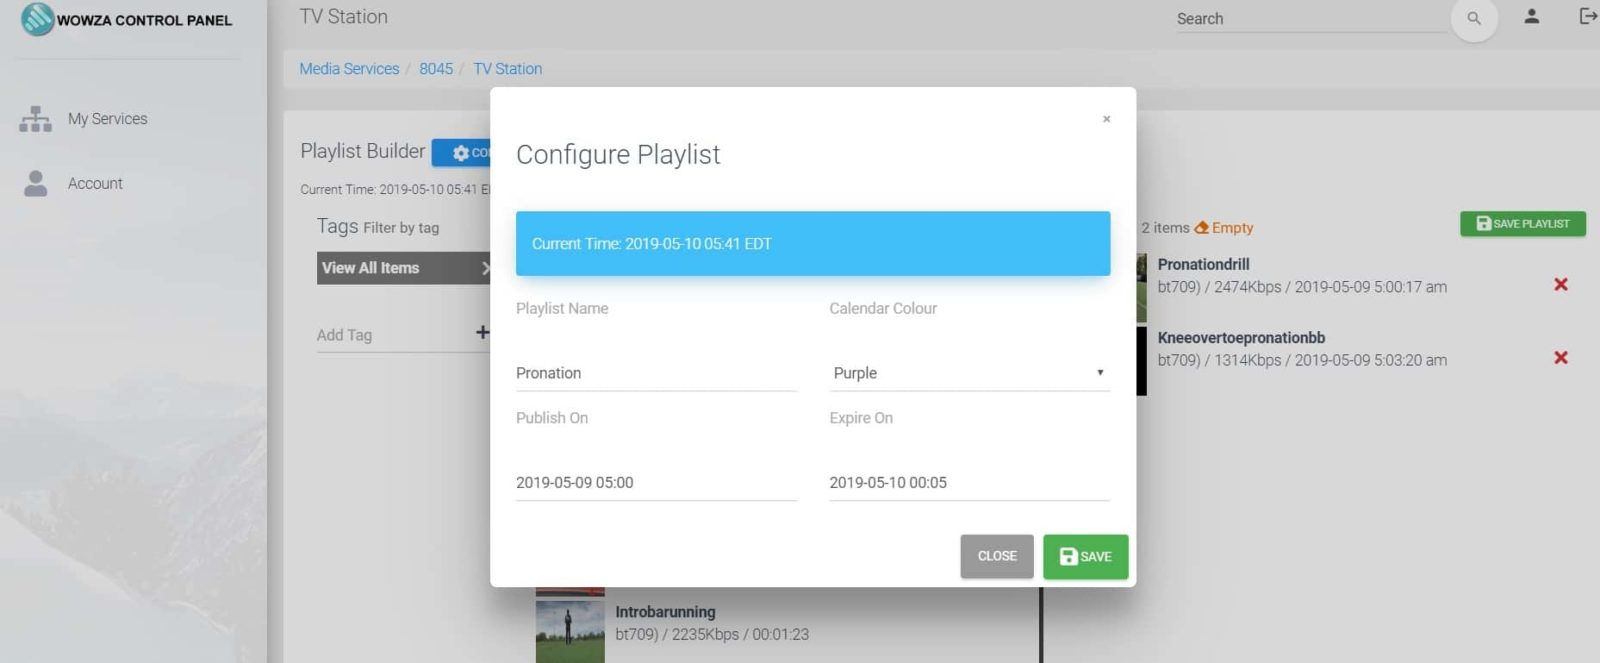 configure a playlist for the tv station